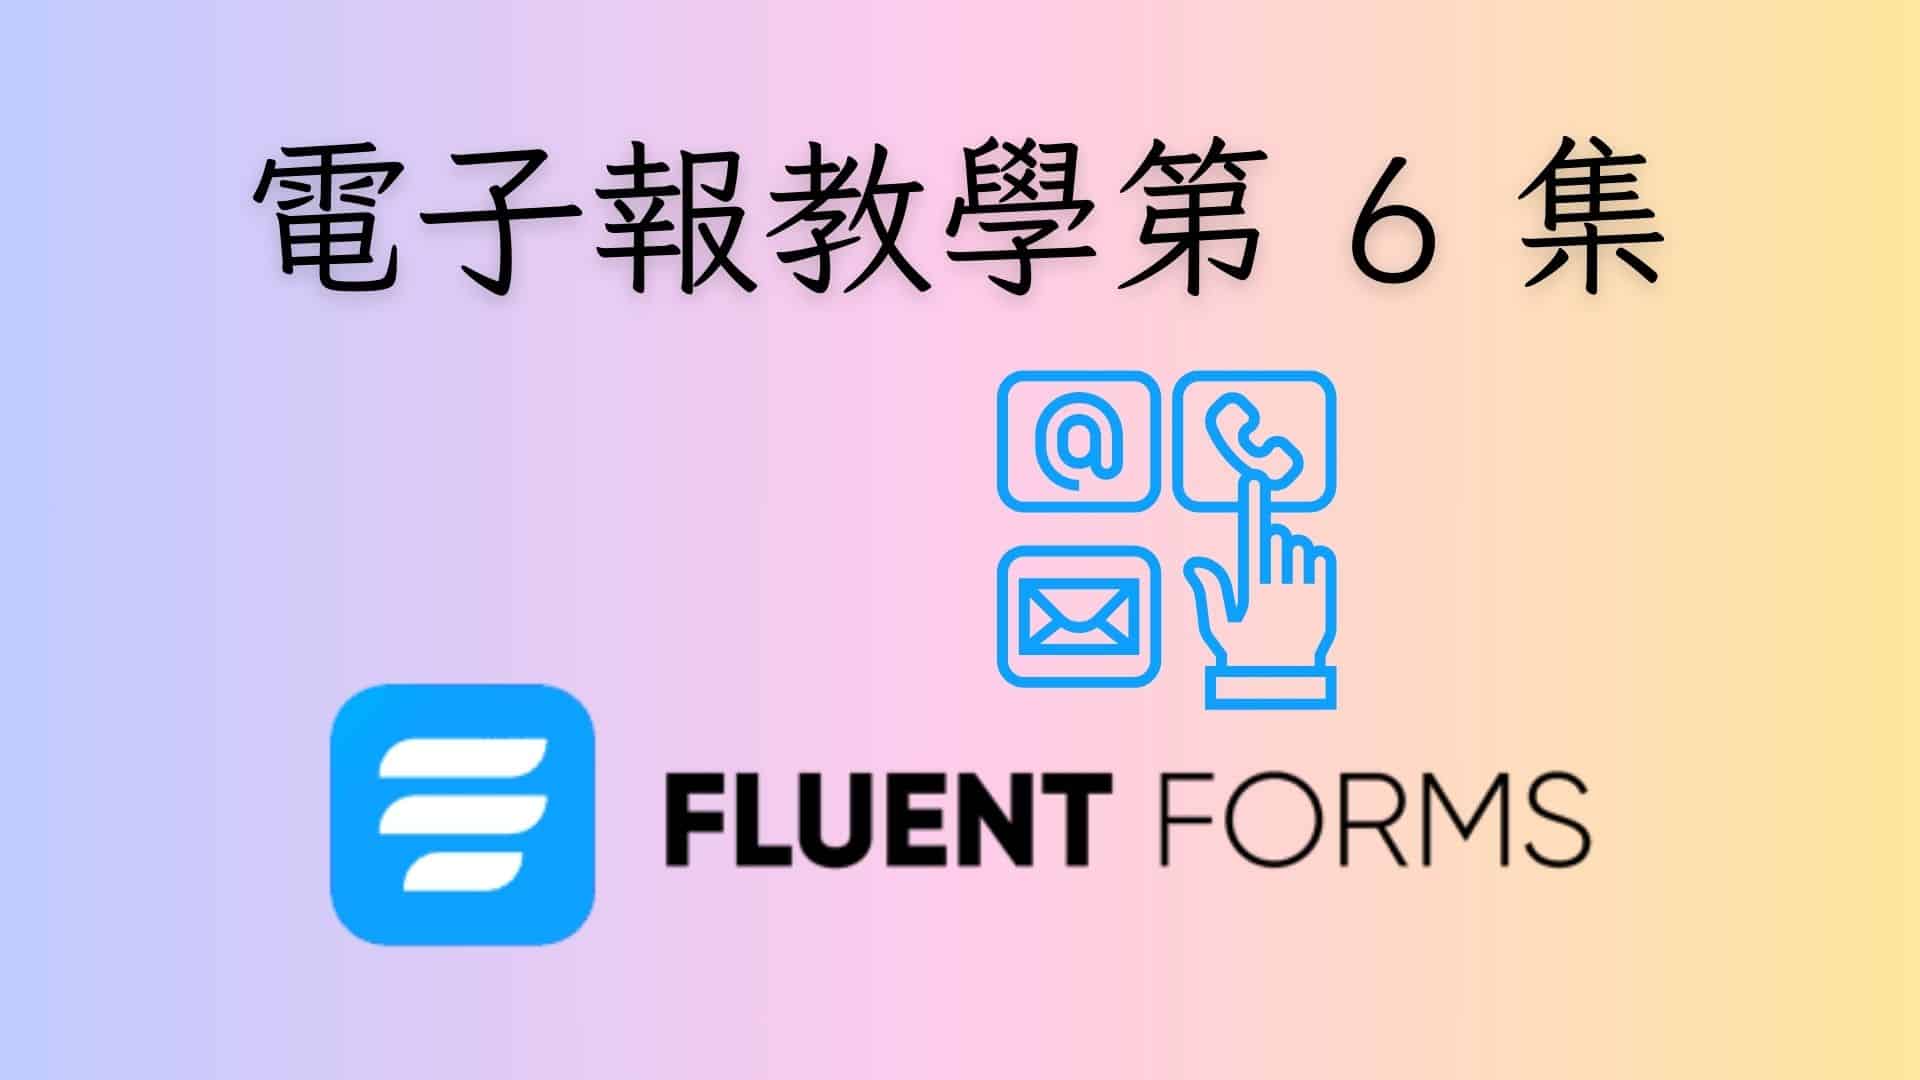 edm-course-6-fluent-forms-for-contact